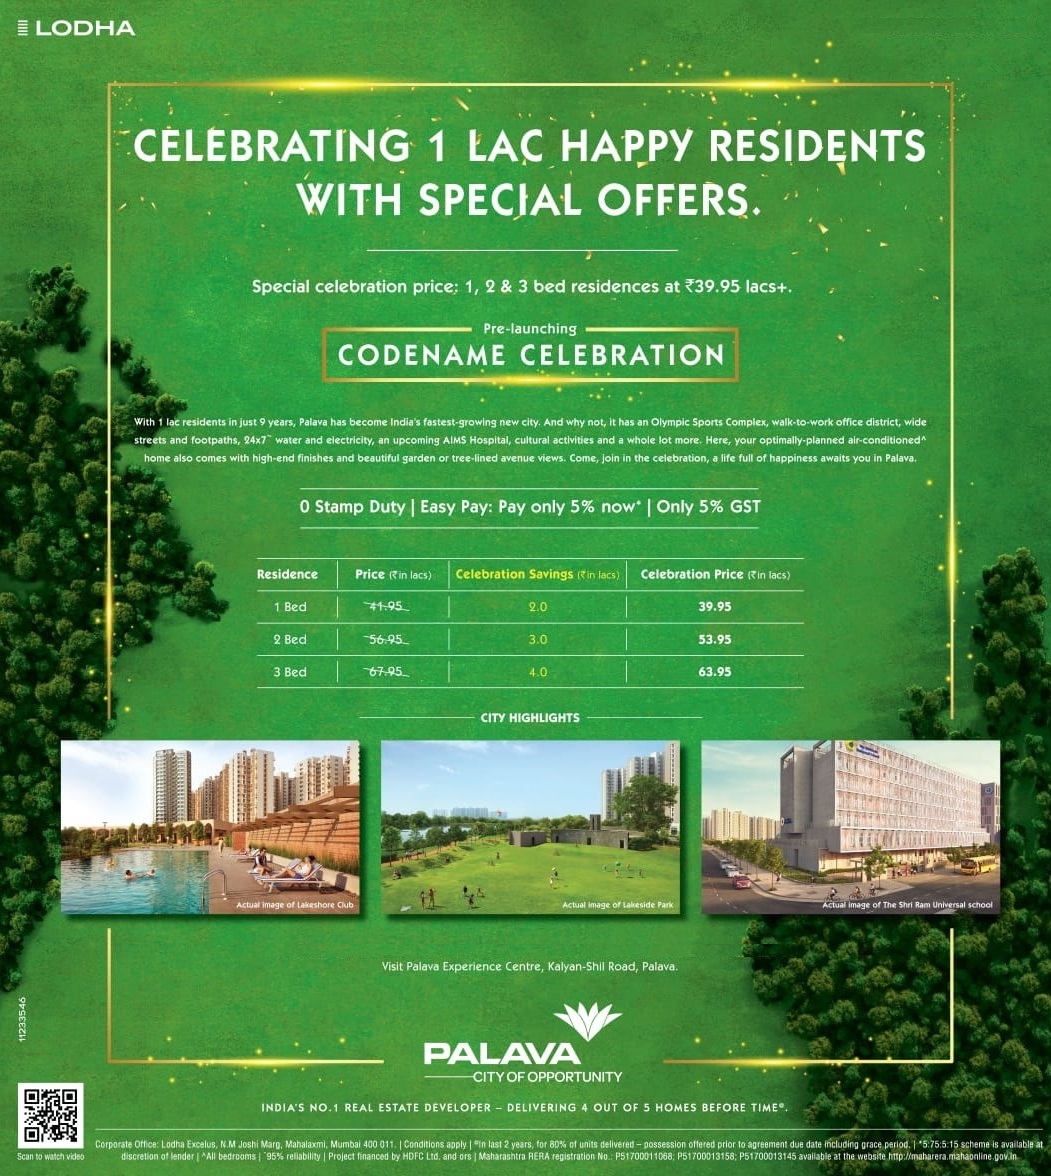 Special celebration price: 1, 2 & 3 bed residences Rs 39.95 lacs at Lodha Codename Celebration in Mumbai Update